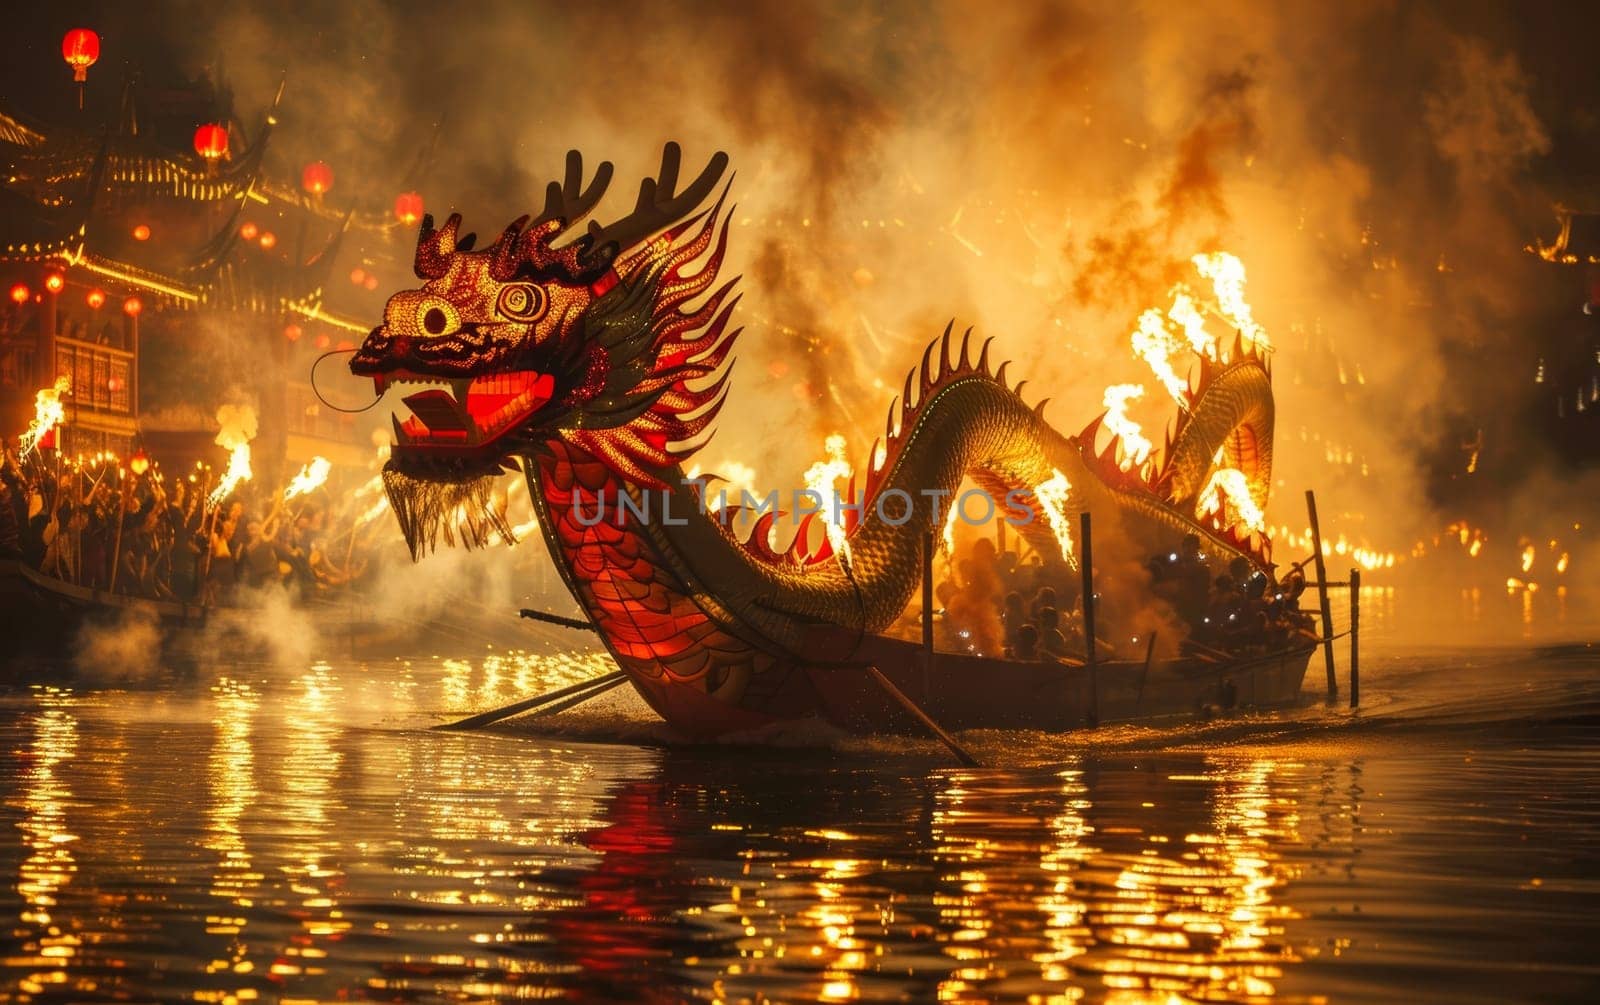 Majestic dragon boat with flames along its body, floating on tranquil waters at sunset, with silhouetted spectators. by sfinks